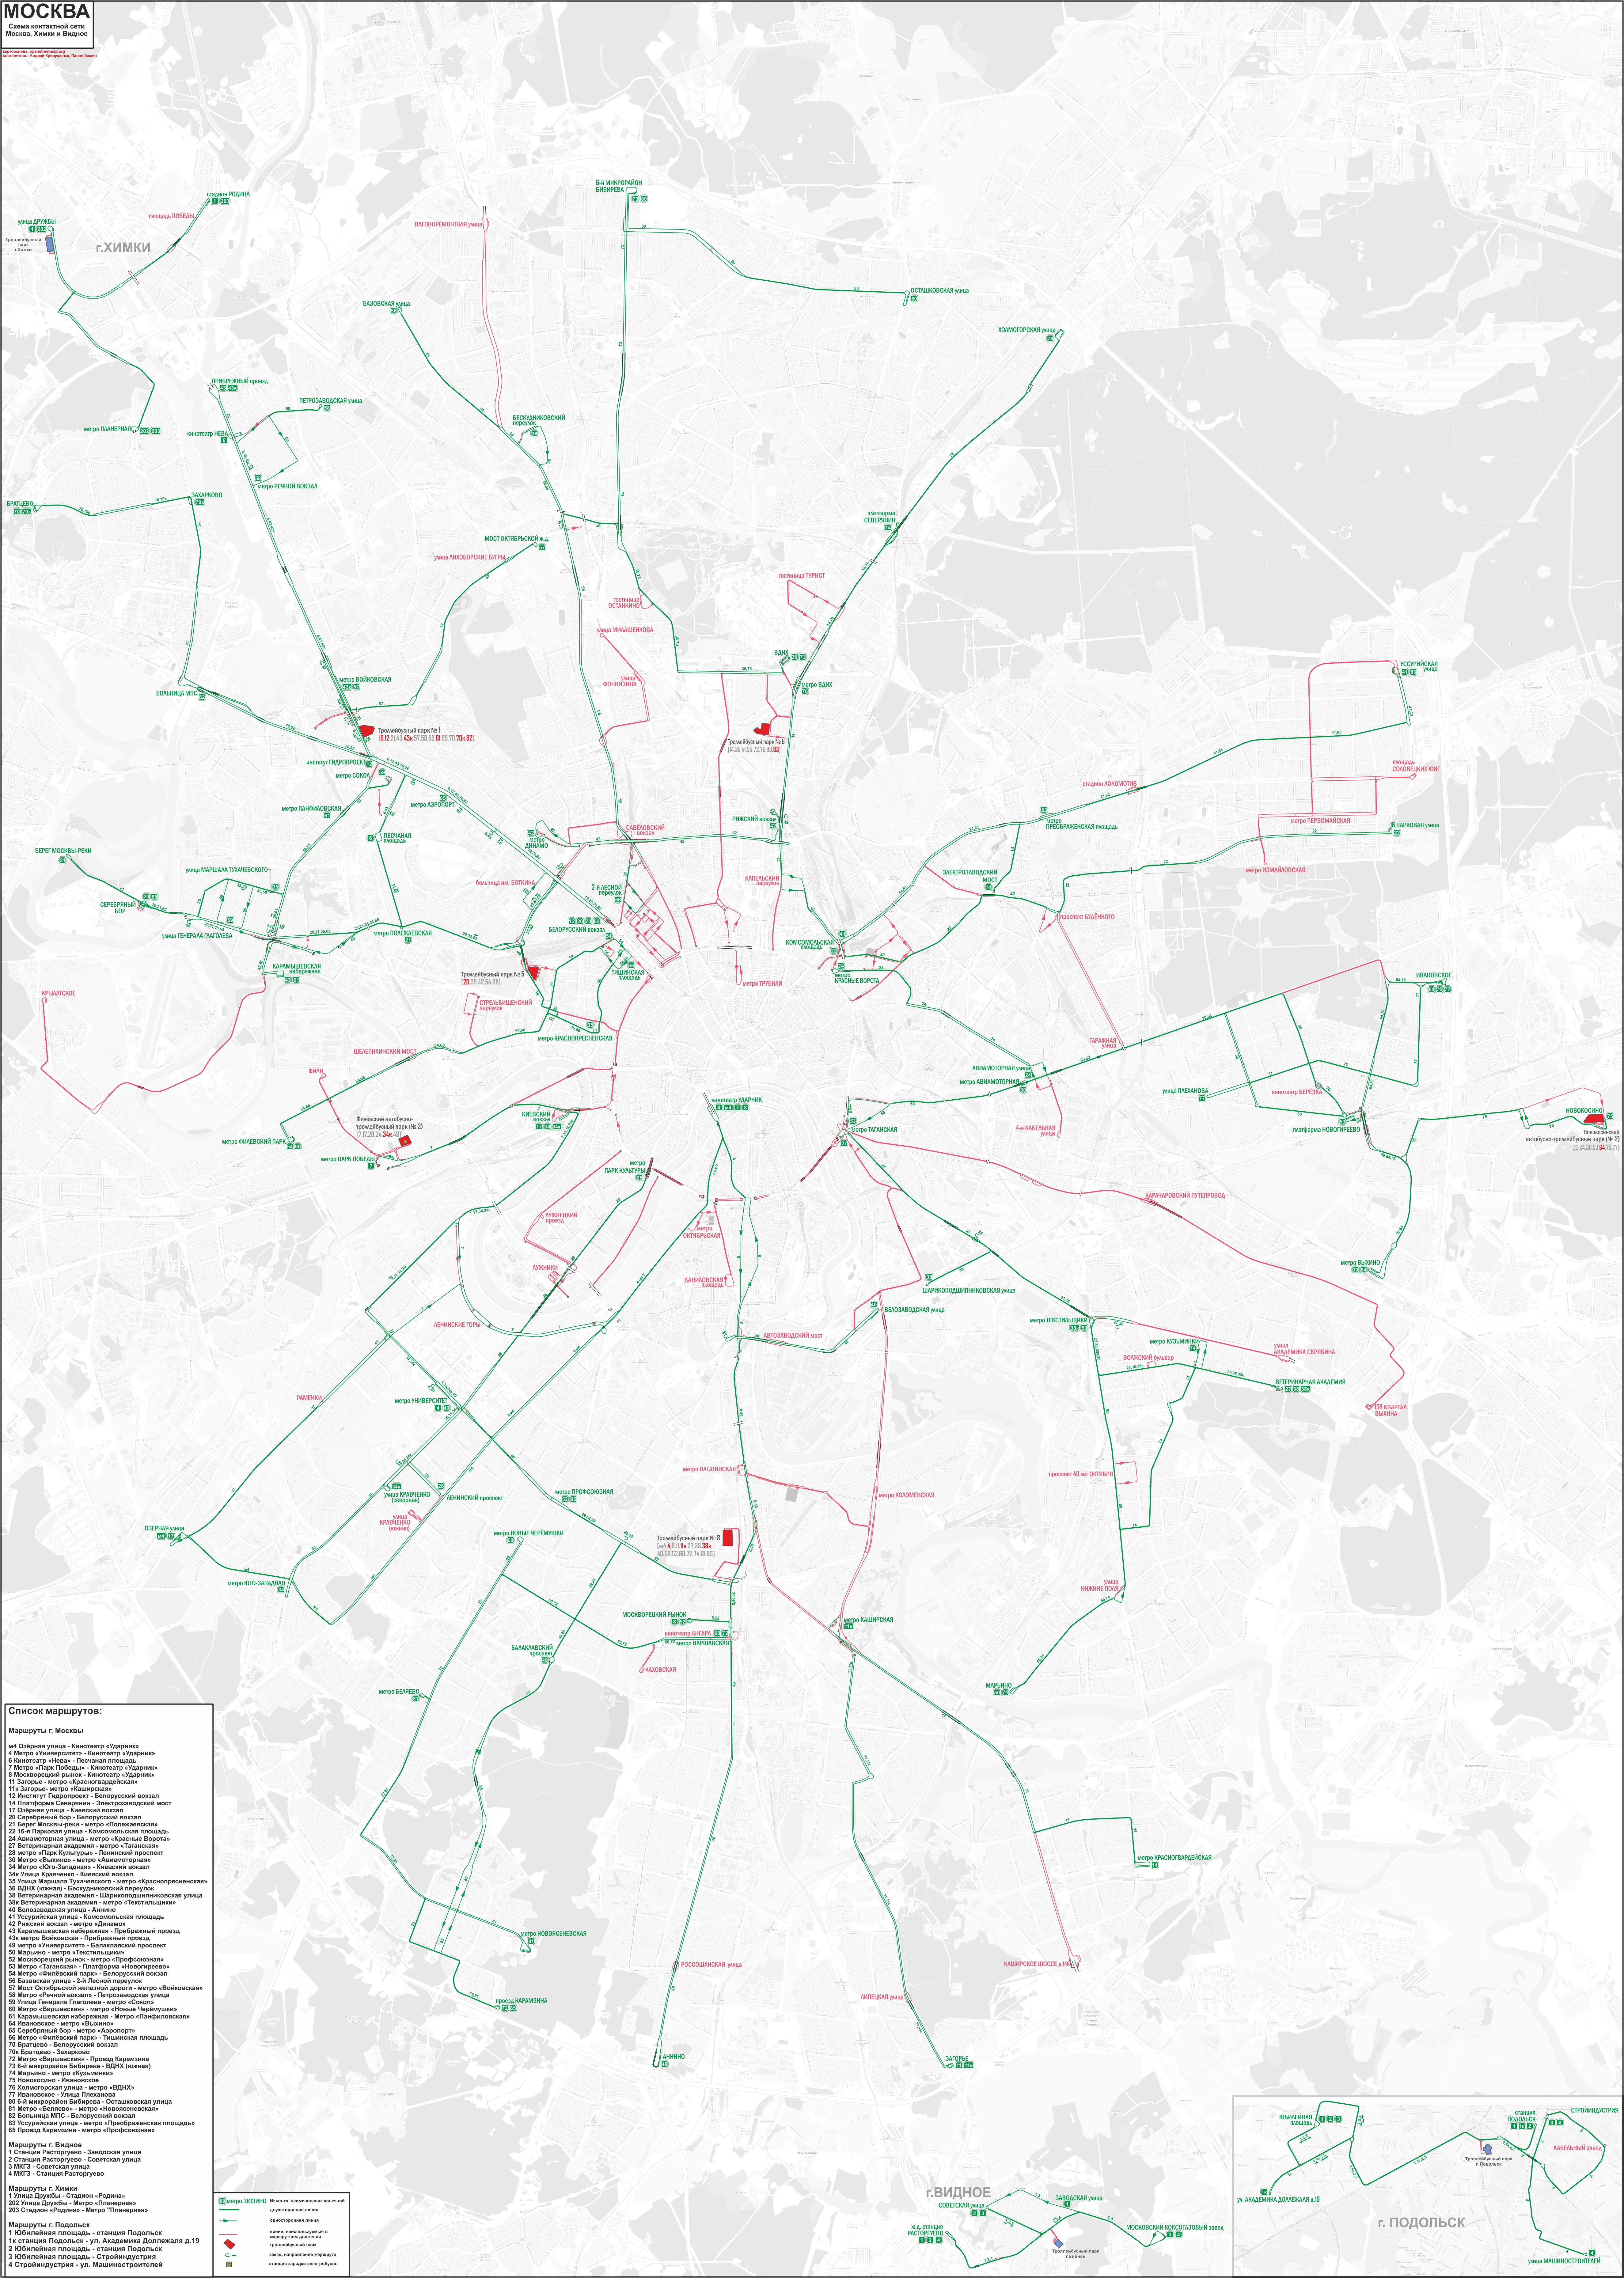 Moscou — Citywide Maps; Khimki — Maps; Vidnoïe — Maps; Podolsk — Maps; Moscou — Tramway and Trolleybus Infrastructure Maps